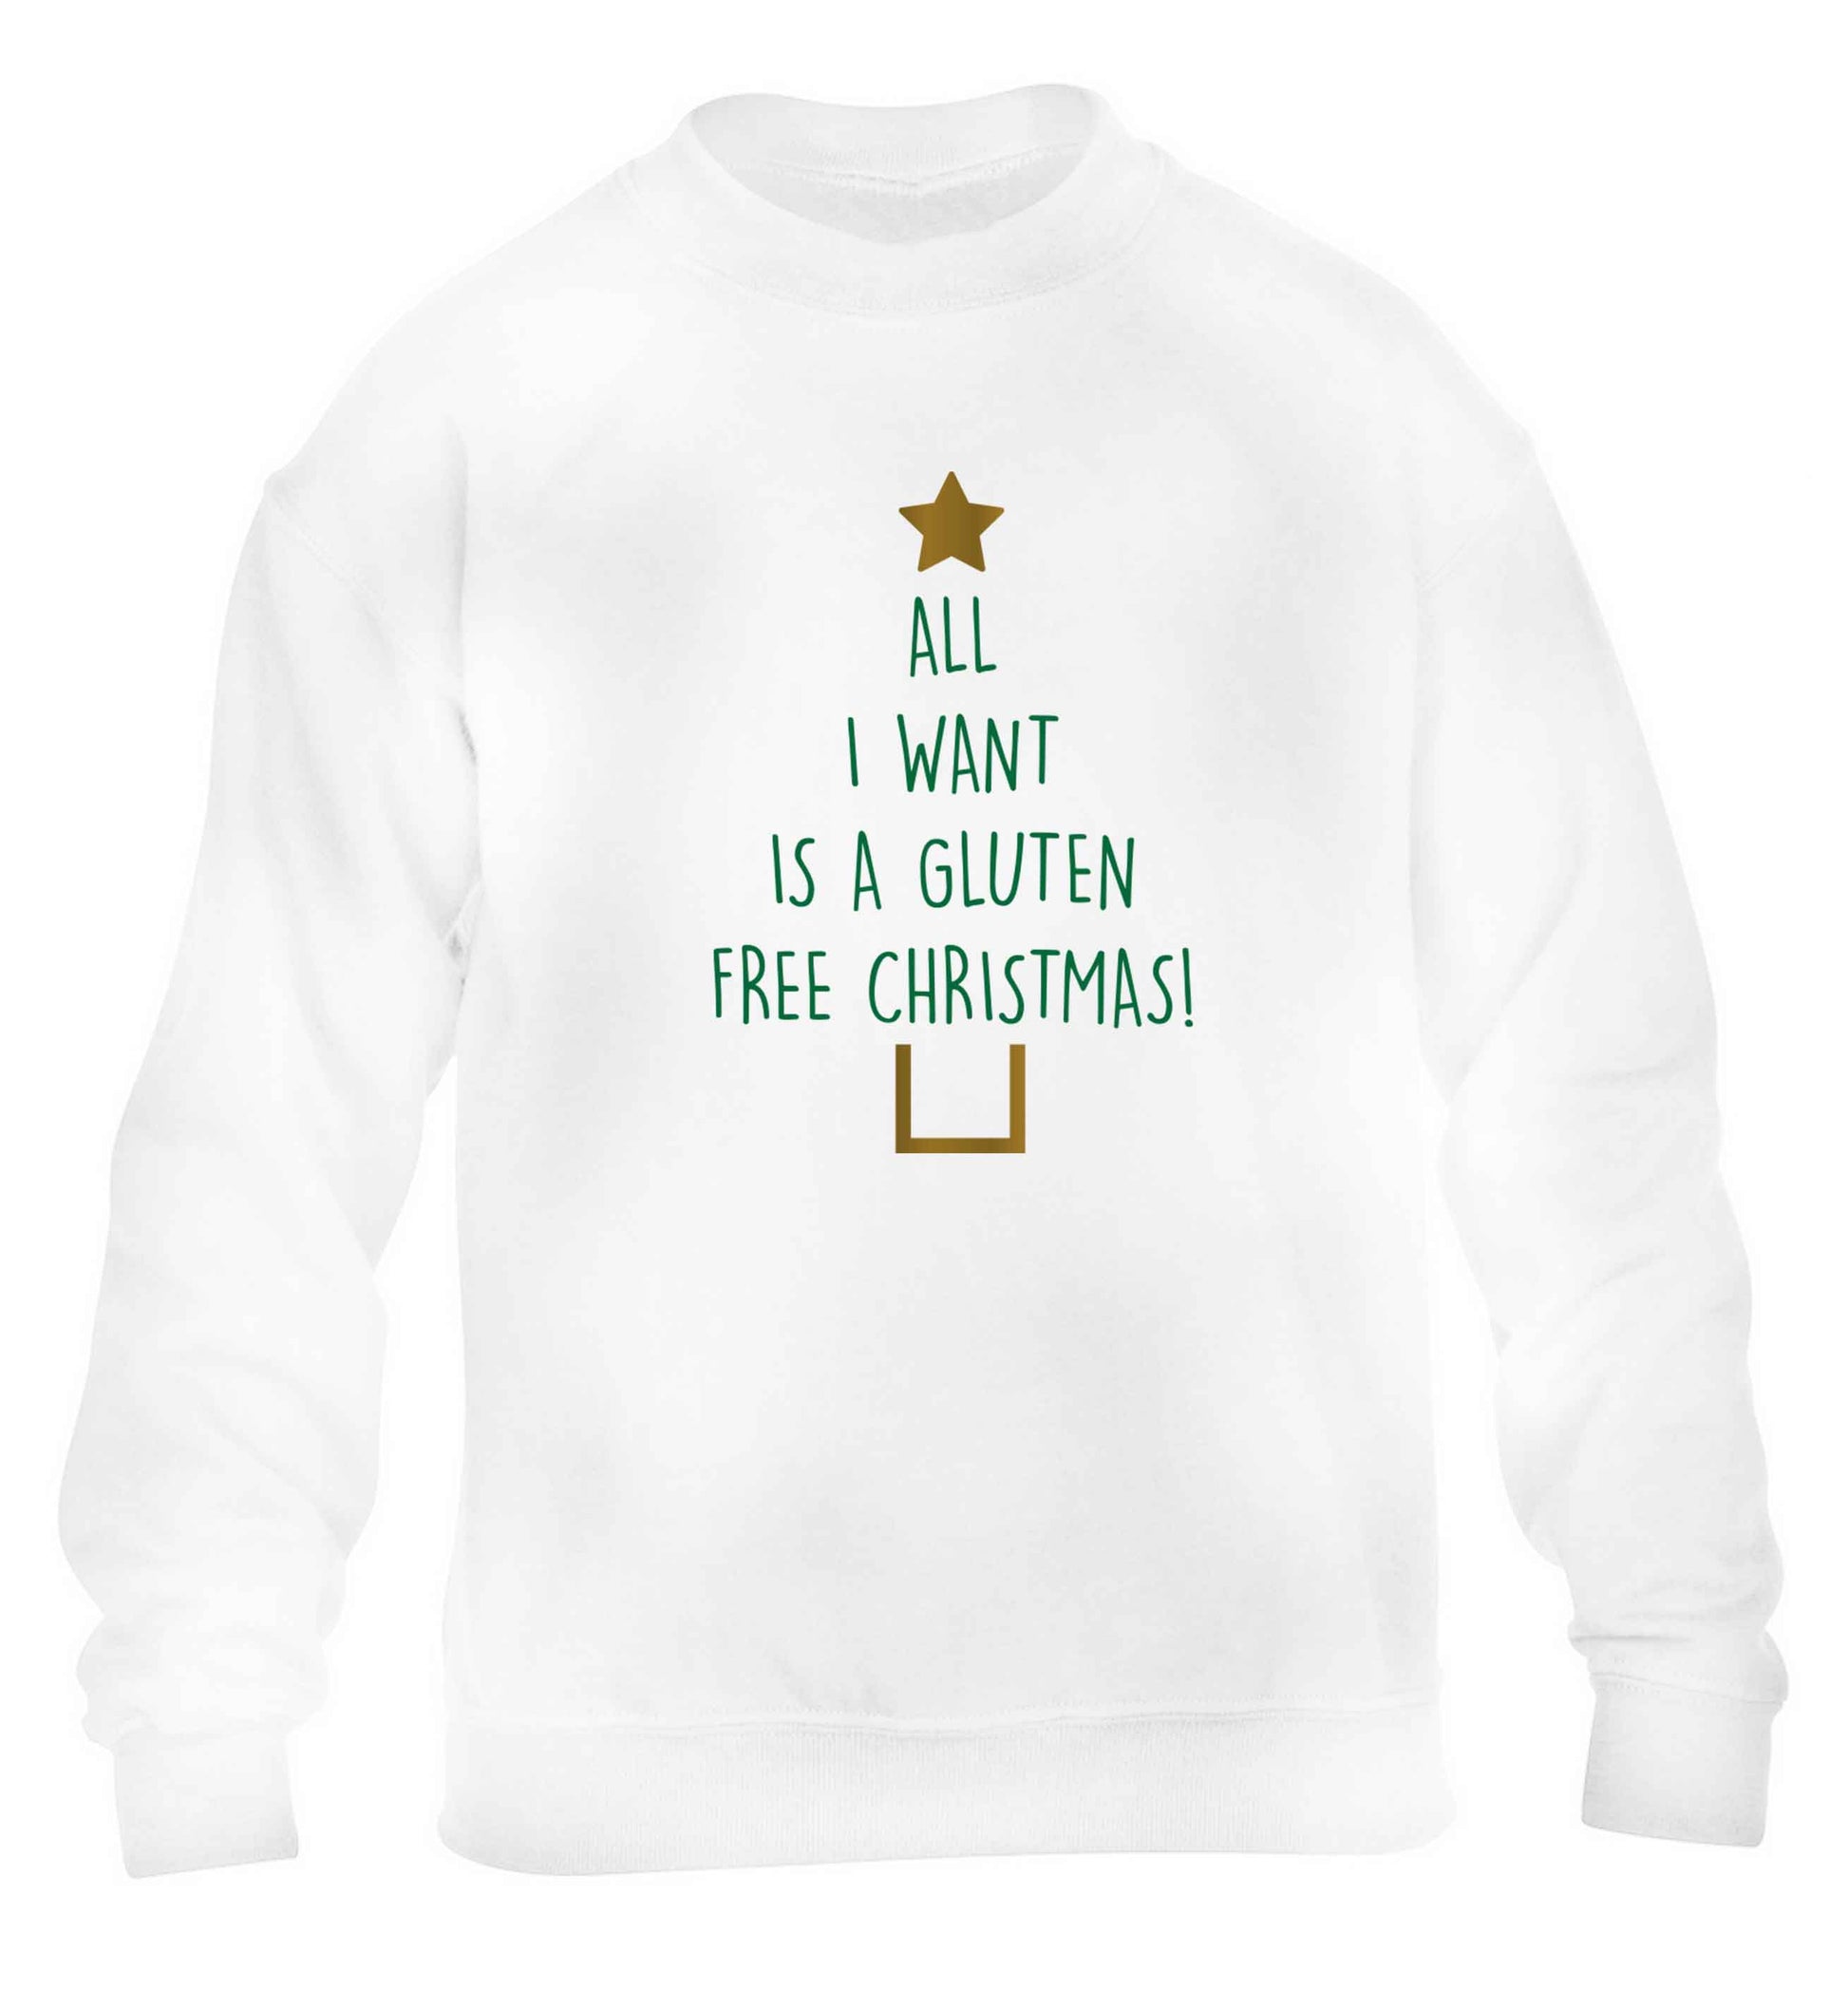 All I want is a gluten free Christmas children's white sweater 12-13 Years